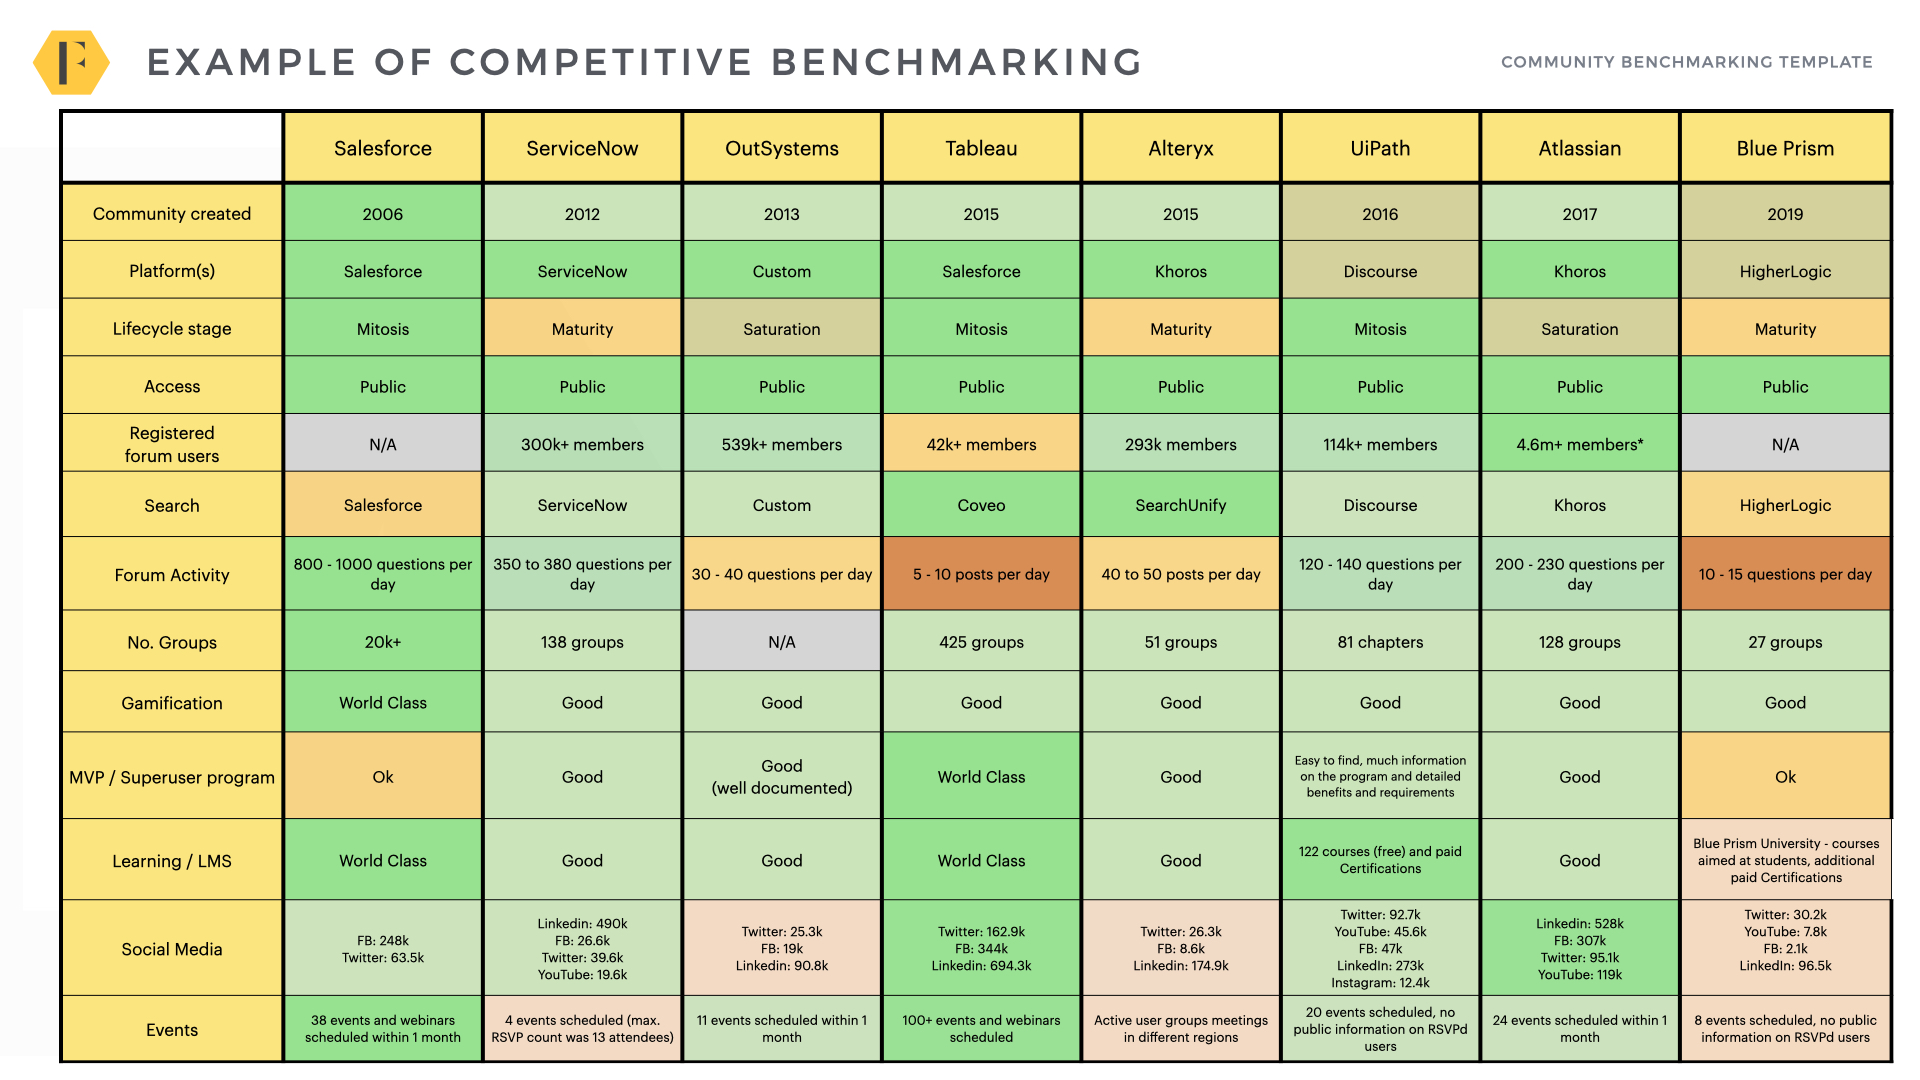 Example of competitive community benchmarking